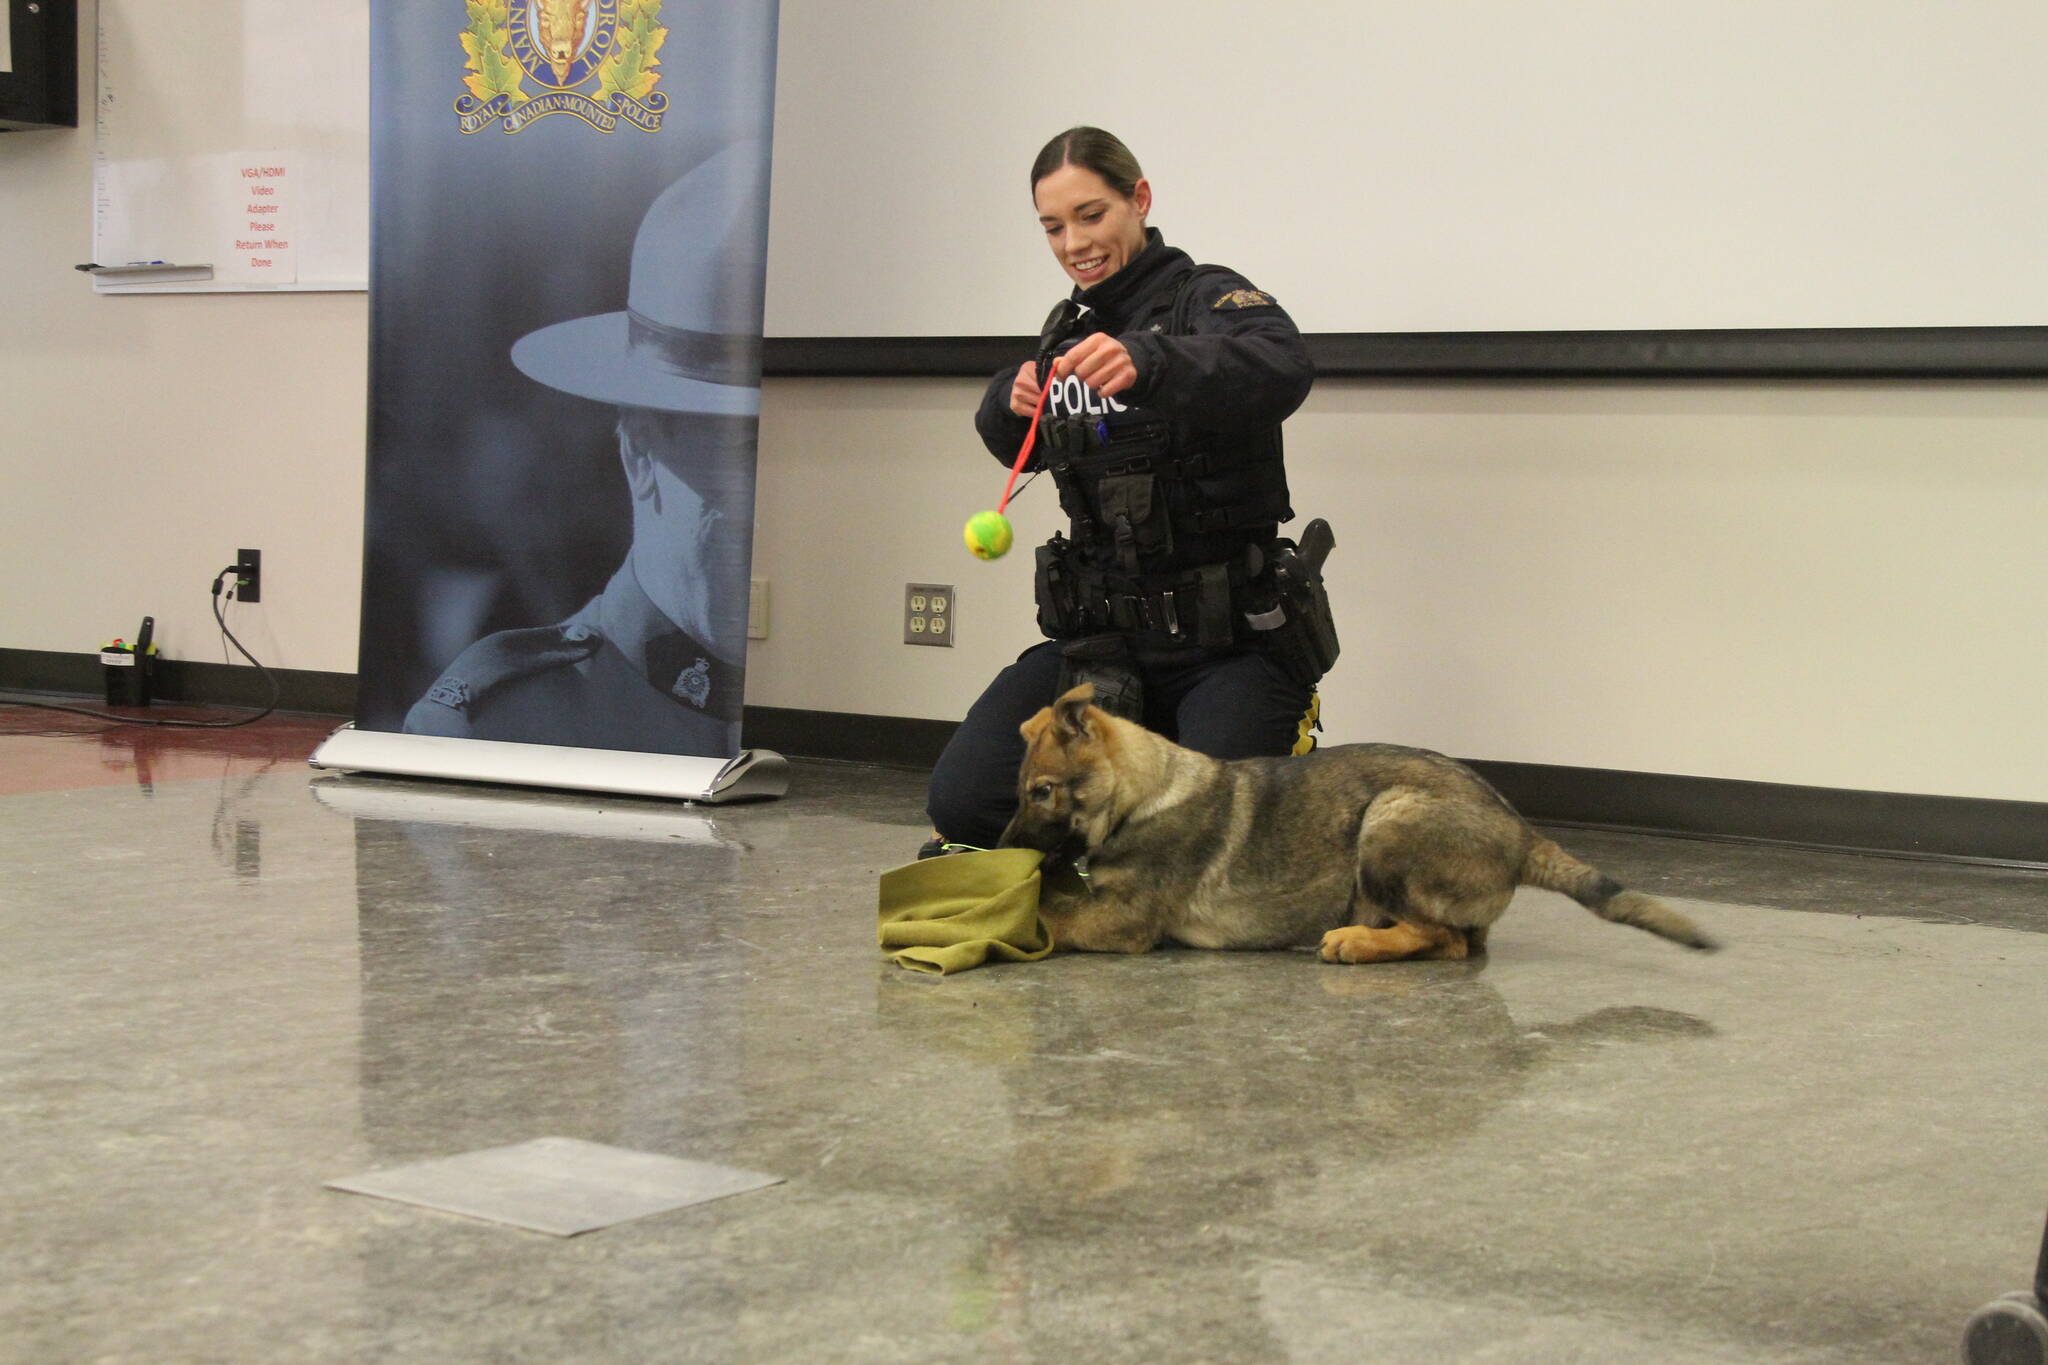 31308950_web1_221214-RDA-red-deer-rcmp-dogs-dogs_3